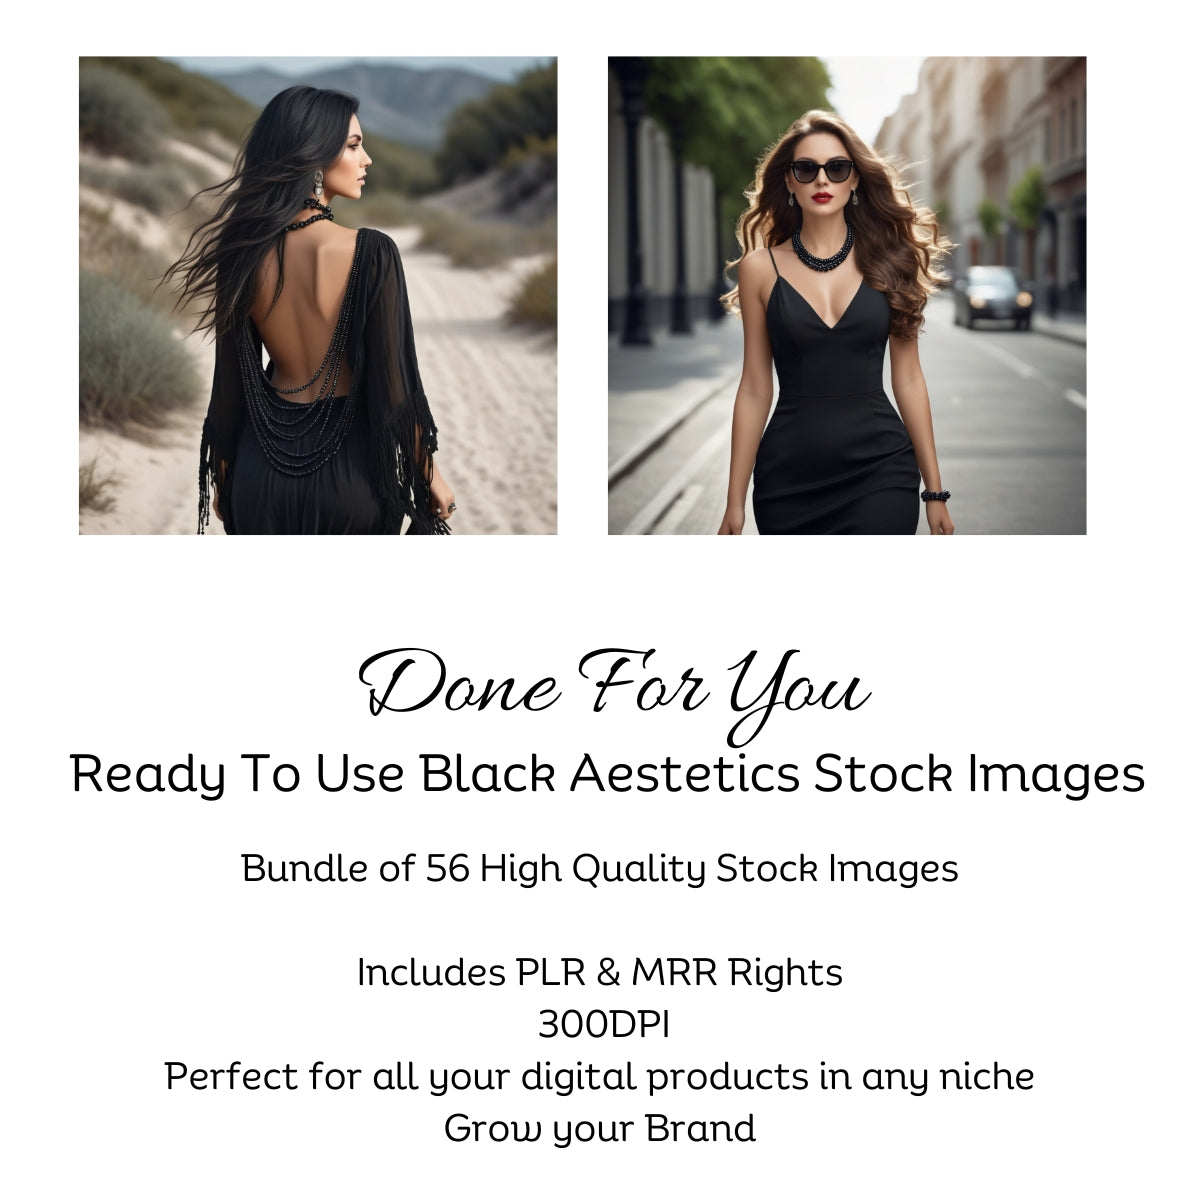 Set of 56 Stock Images, Black Aestetic Stock Photos with Commercial Use and Master Resell Rights